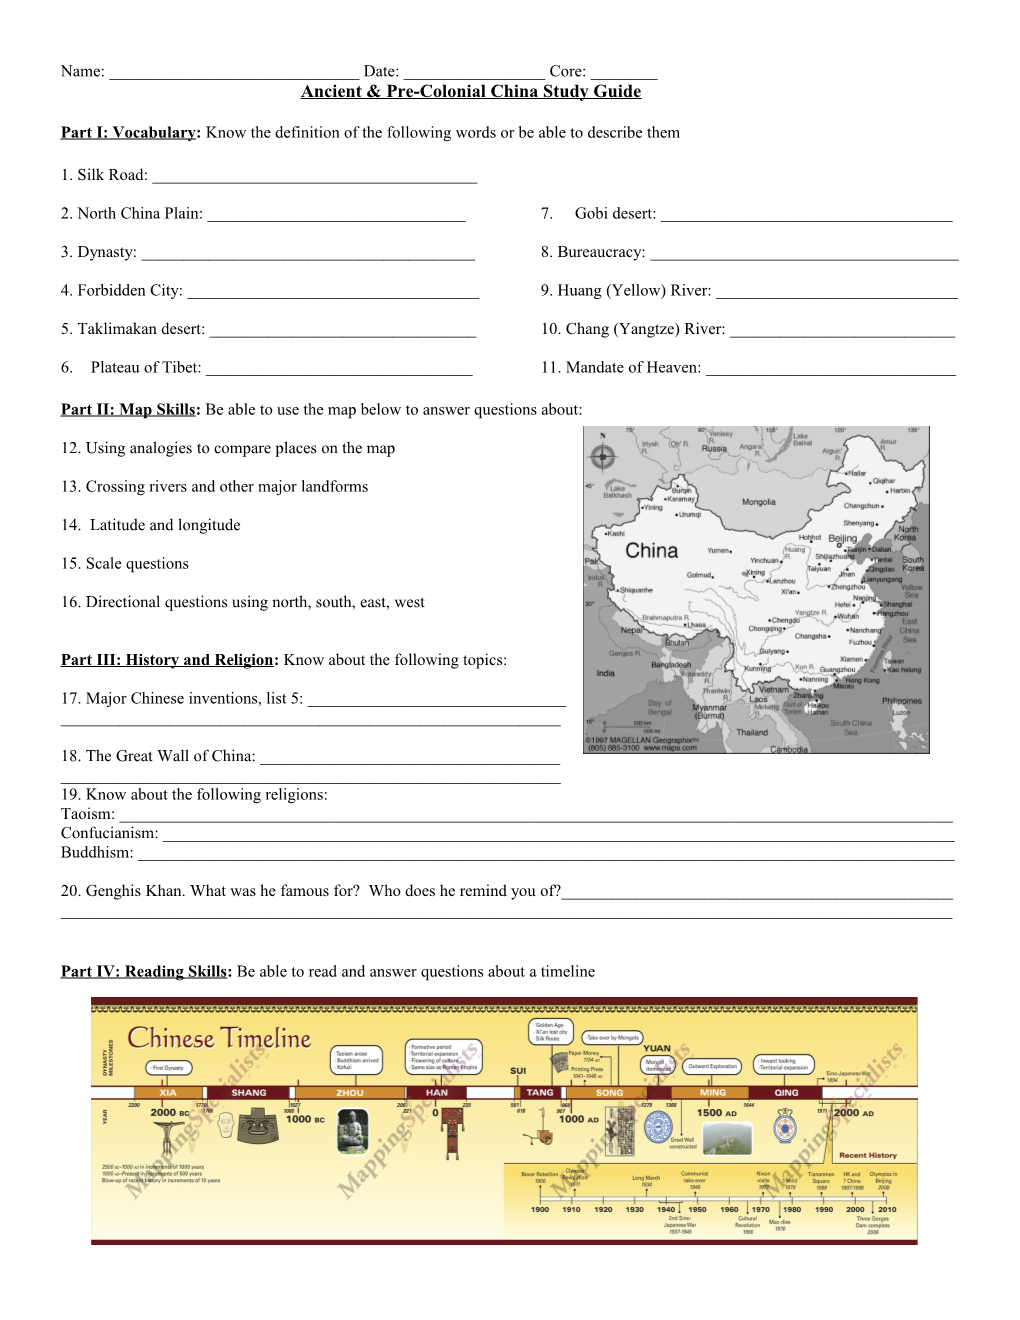 Ancient & Pre-Colonial China Study Guide